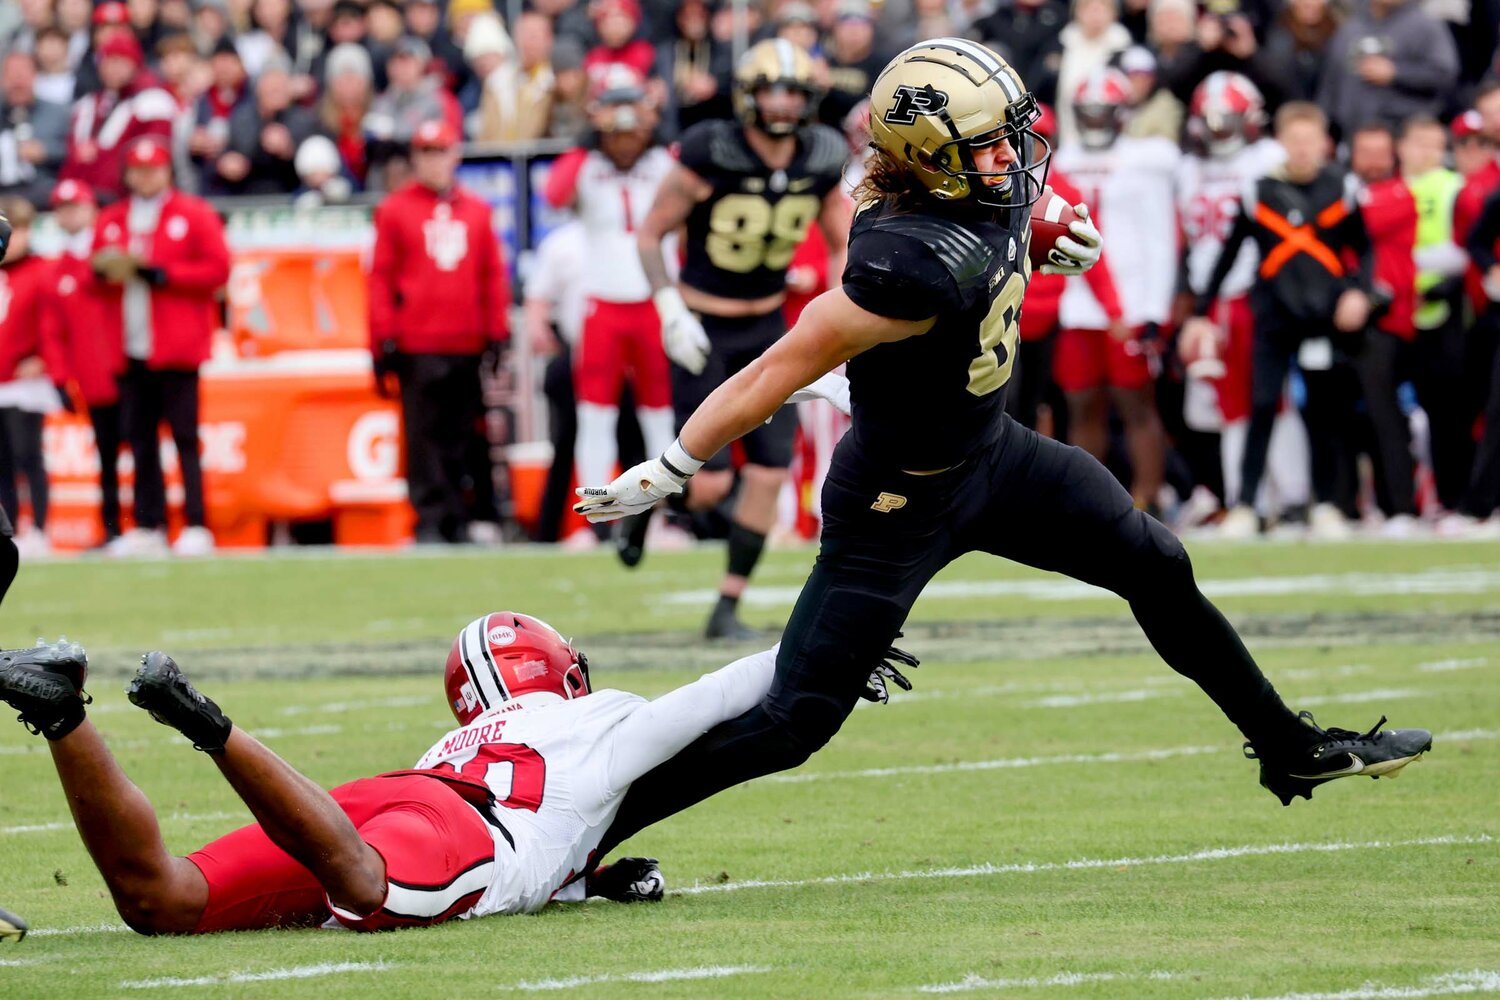 George Burhenn of Purdue - breaking free from tackle attempt by Louis Moore of Indiana for 33-yard touchdown catch and run